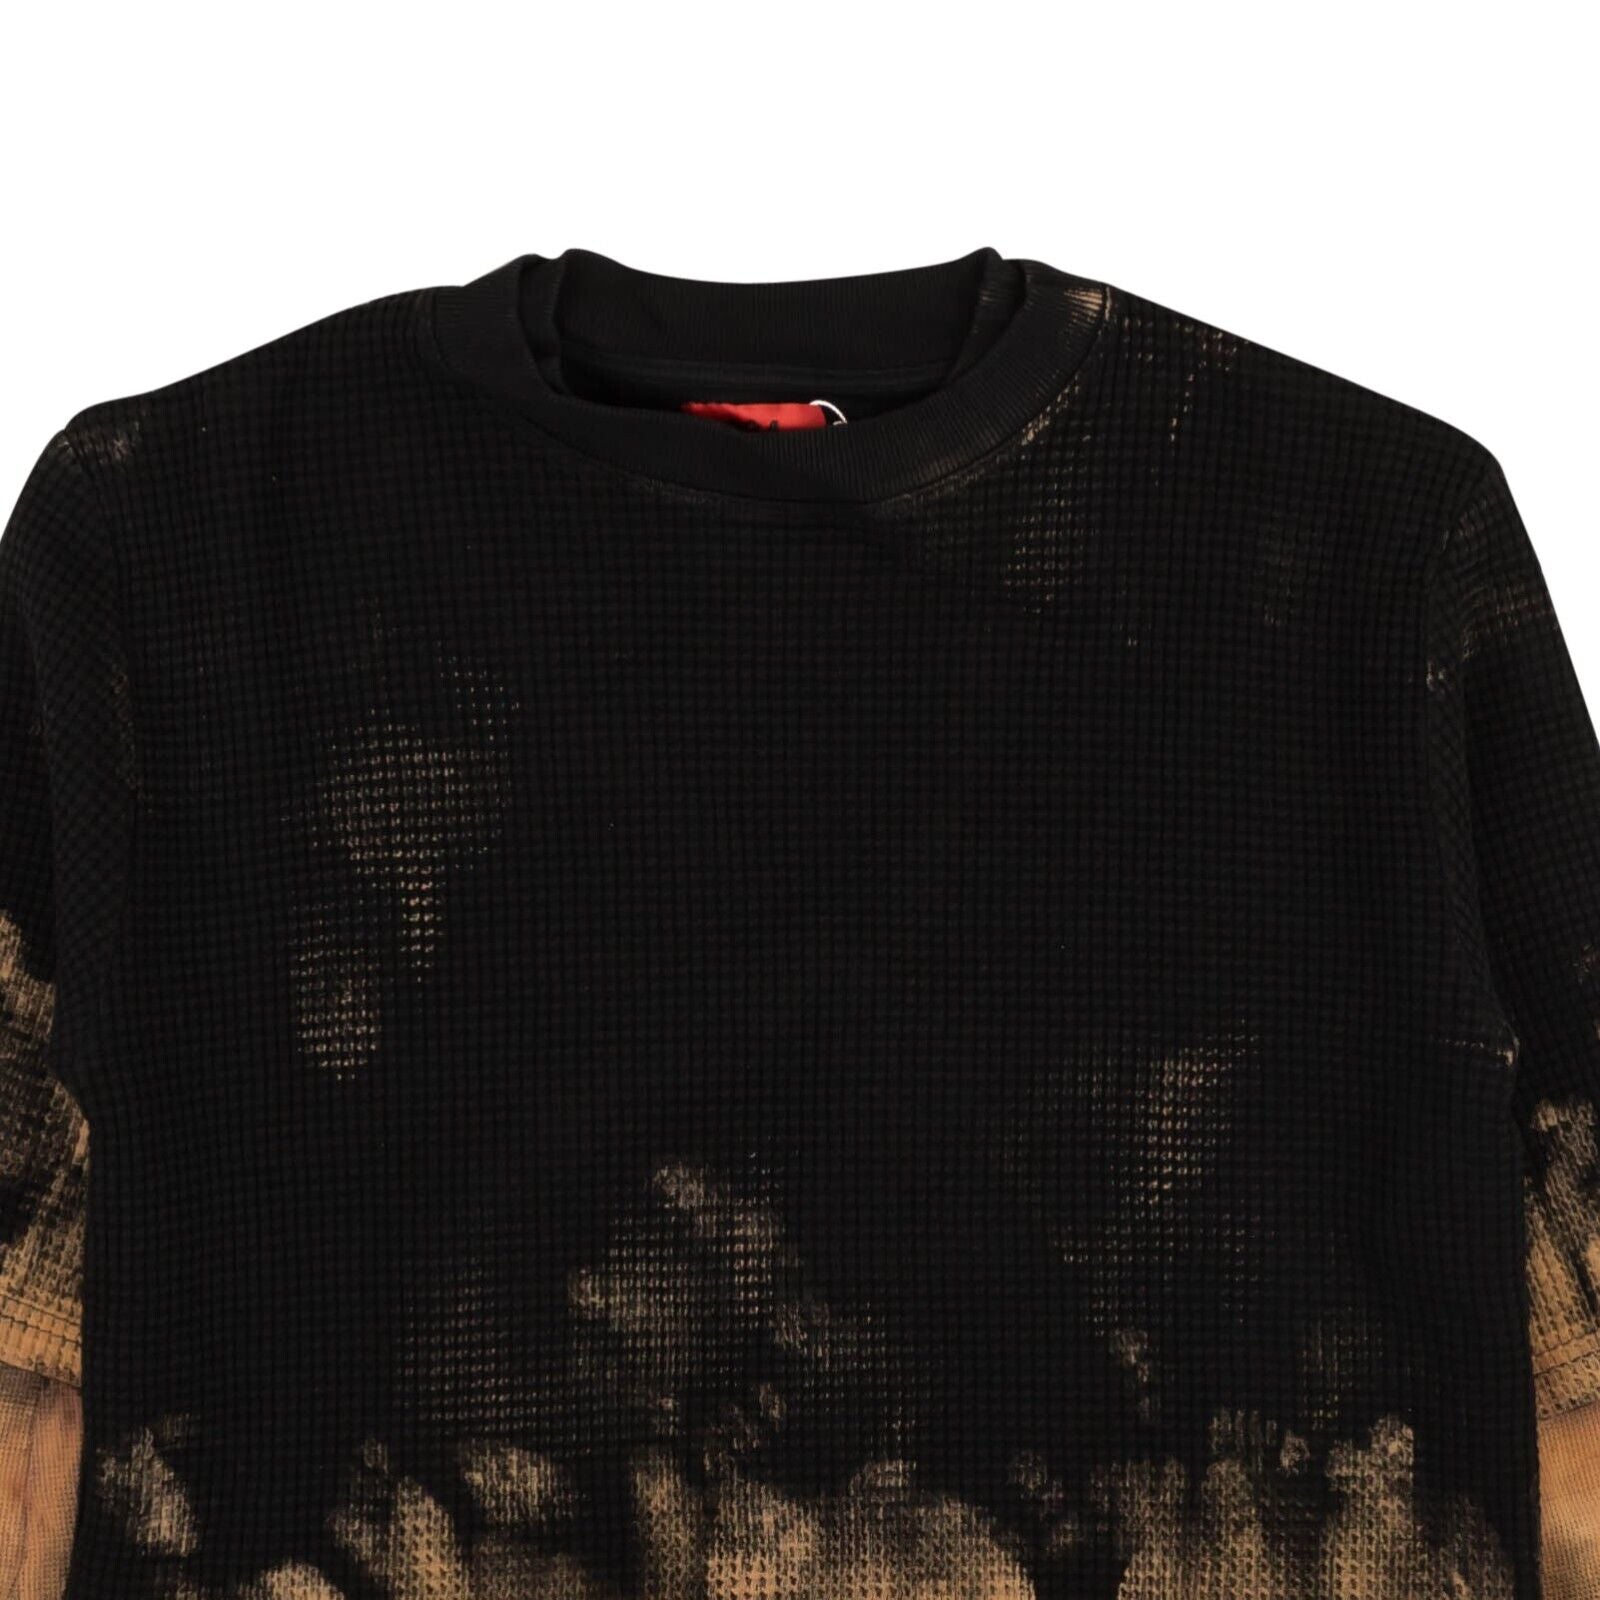 424 On Fairfax Waffle Knit Double Layer T-Shirt - Black/Brown